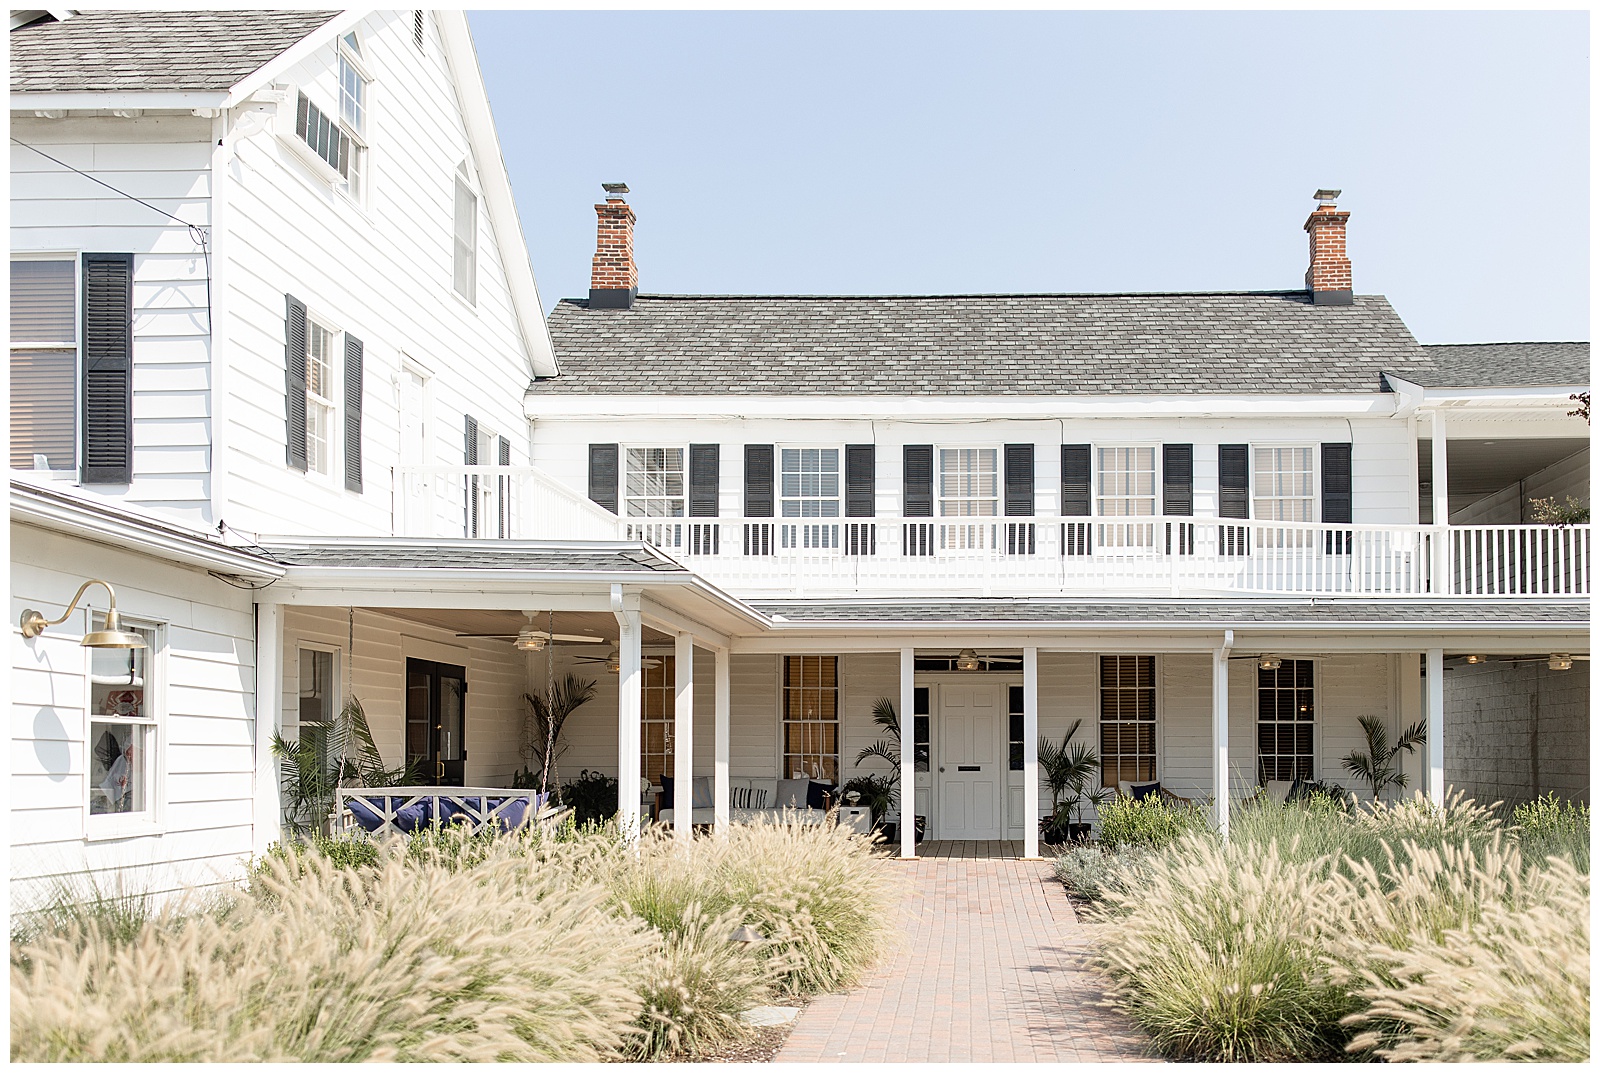 beautiful white beach house with black shutters and wrap-around front porch on a sunny day in maryland